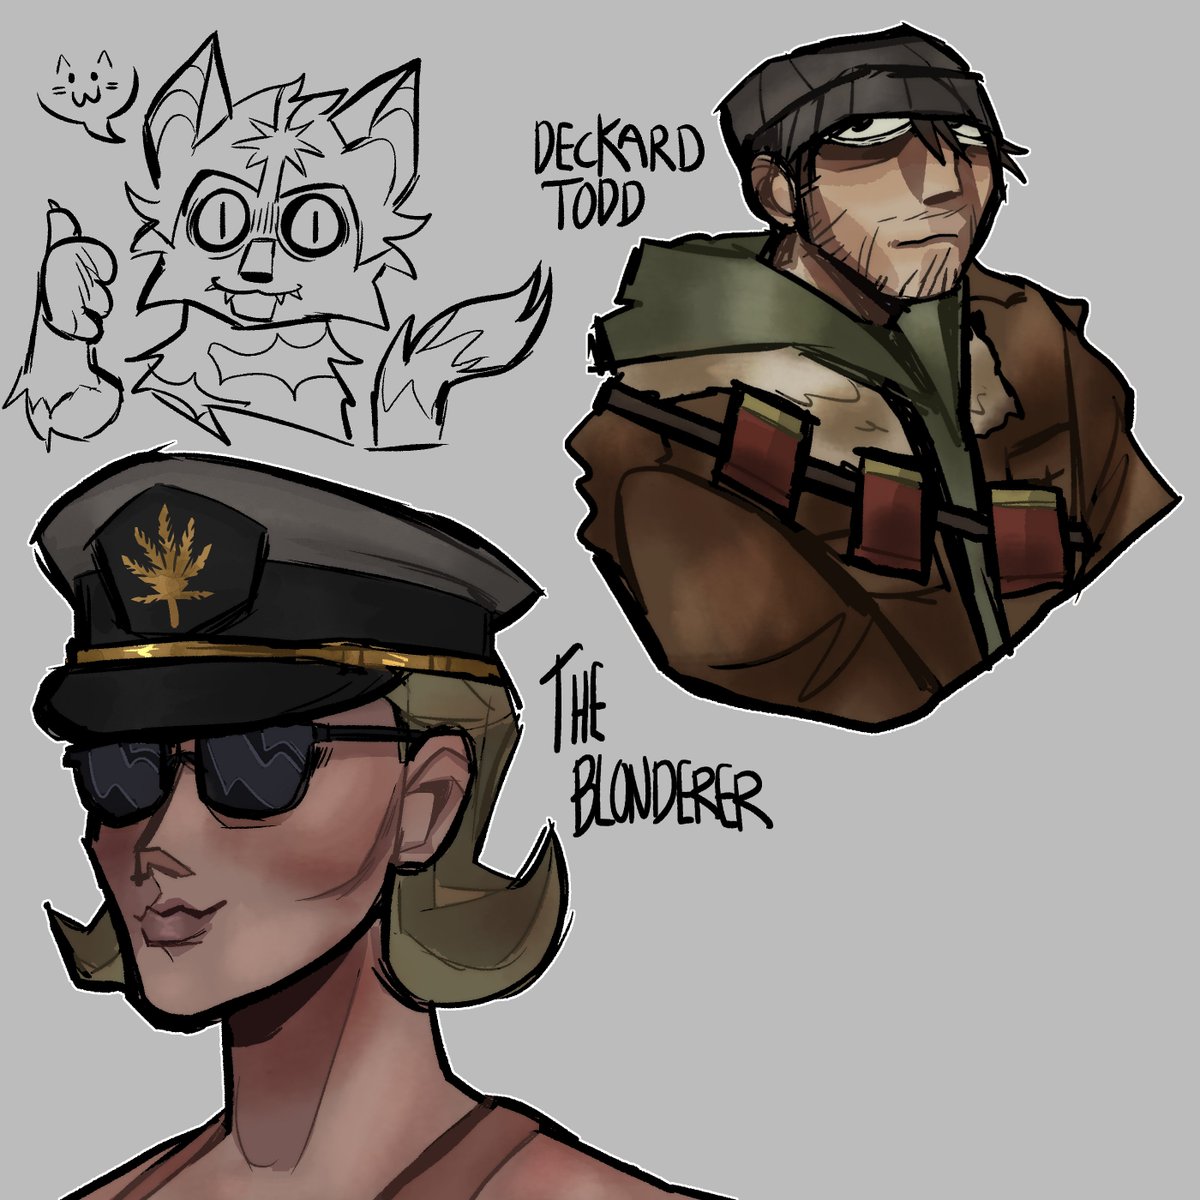 Big thank you to those who tuned in for my first (and very rough) stream!! We drew some Fallout OCs together ^_^